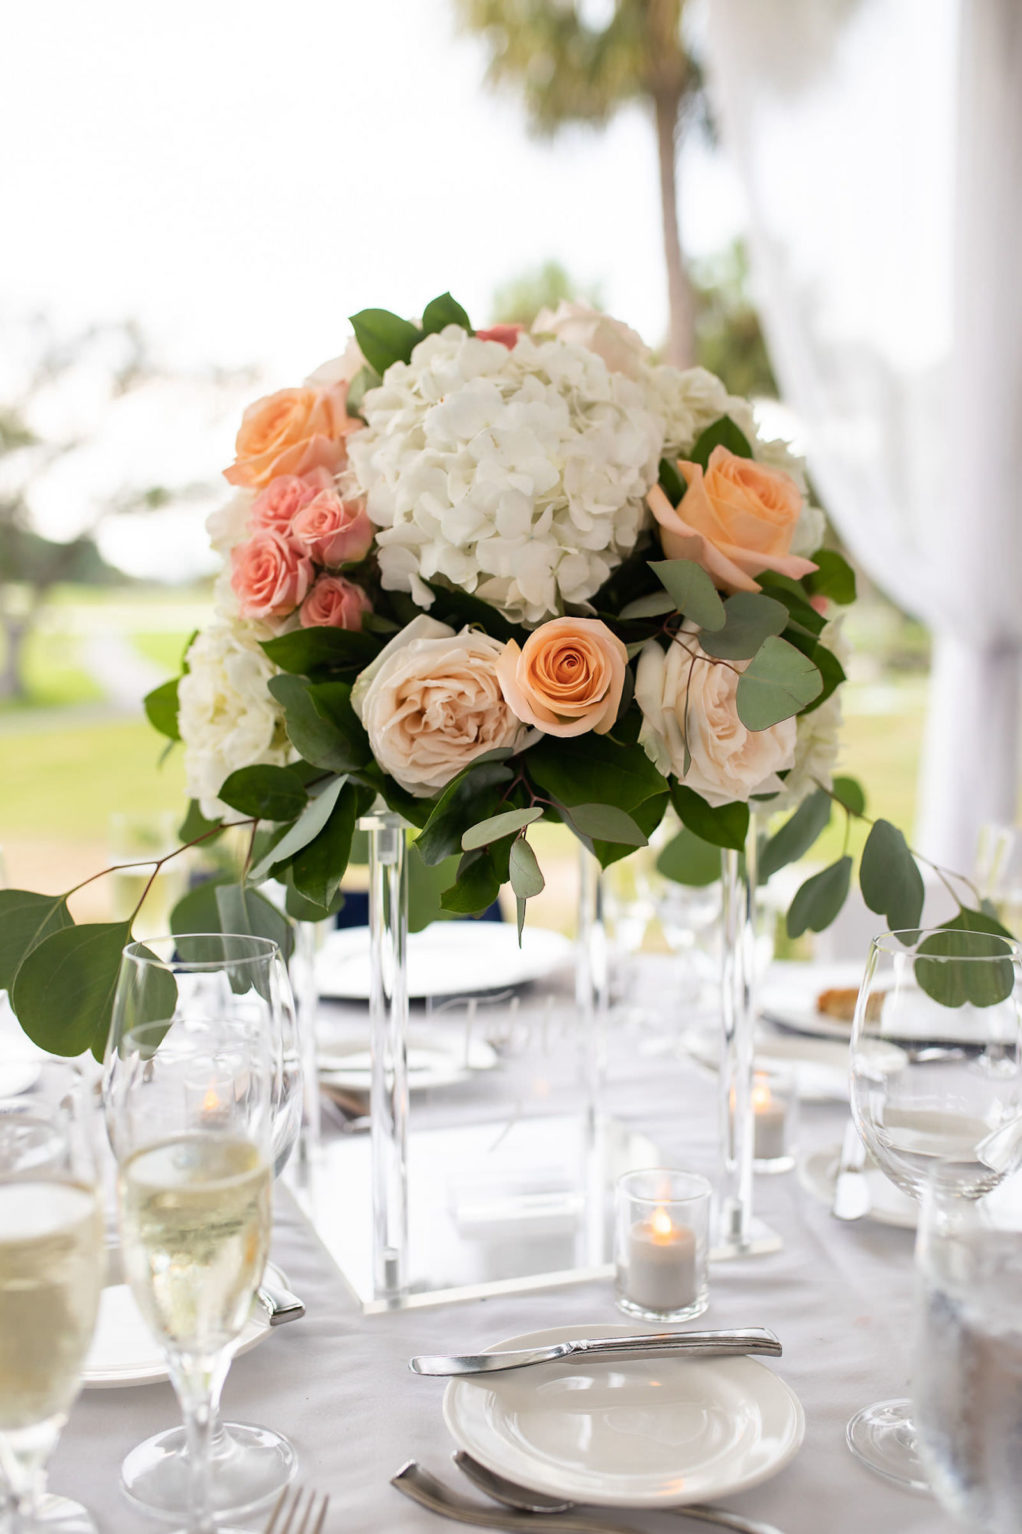 Acrylic Wedding Centerpiece Riser Vase with Peach and Coral Roses, White Hydrangea and Eucalyptus Greenery